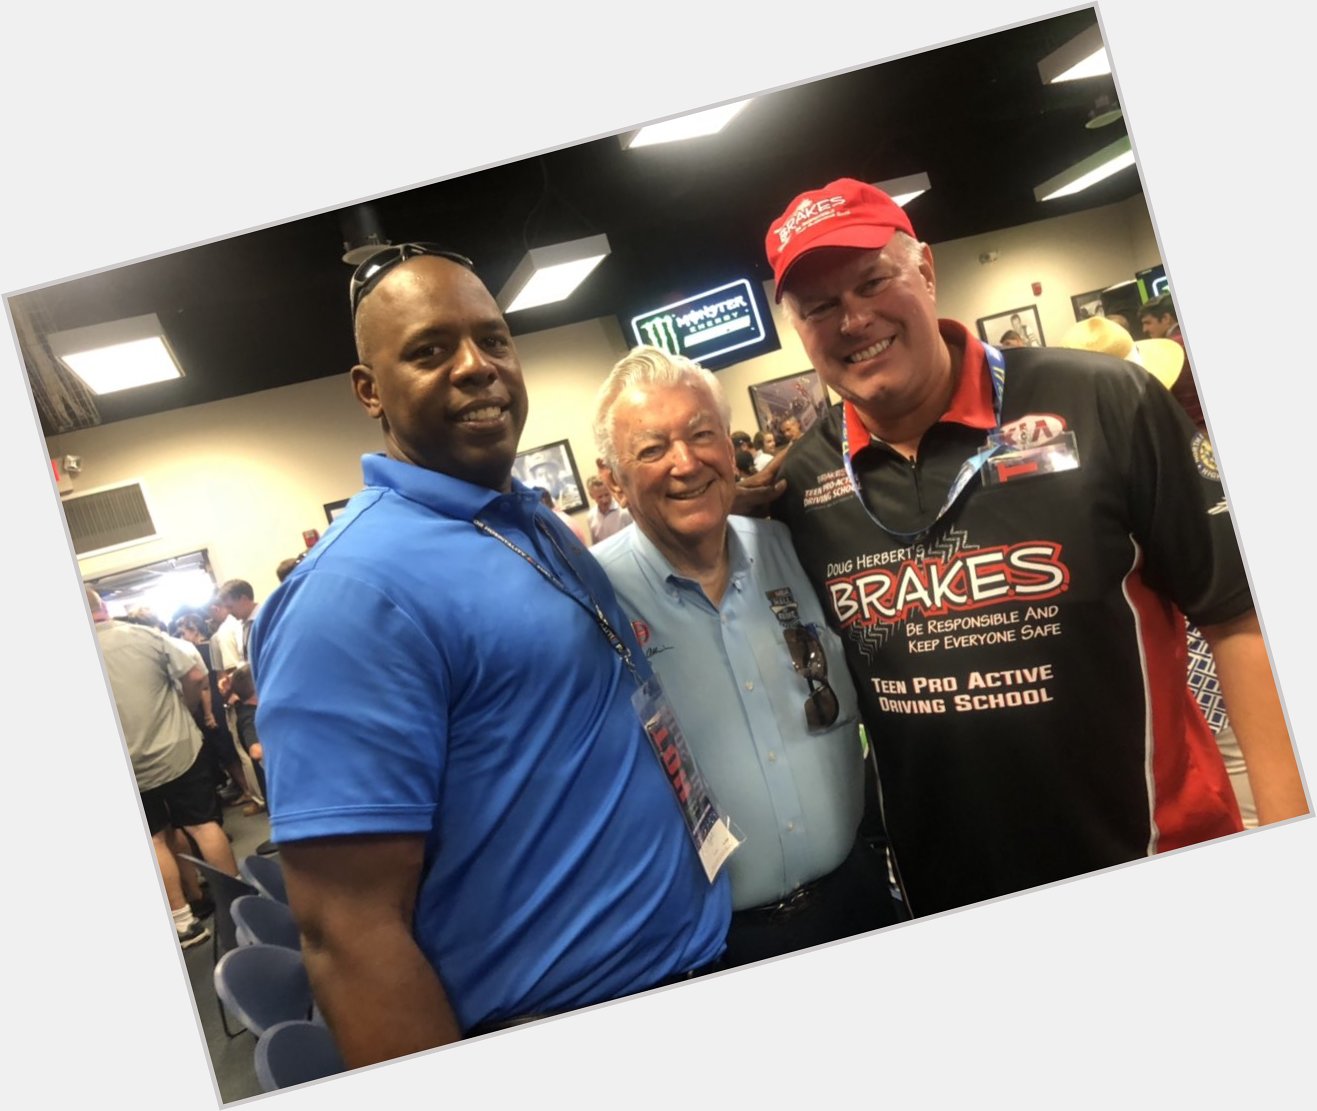 Happy birthday to Hall of Famer Bobby Allison. Hanging out here with our friend Doug Herbert. 